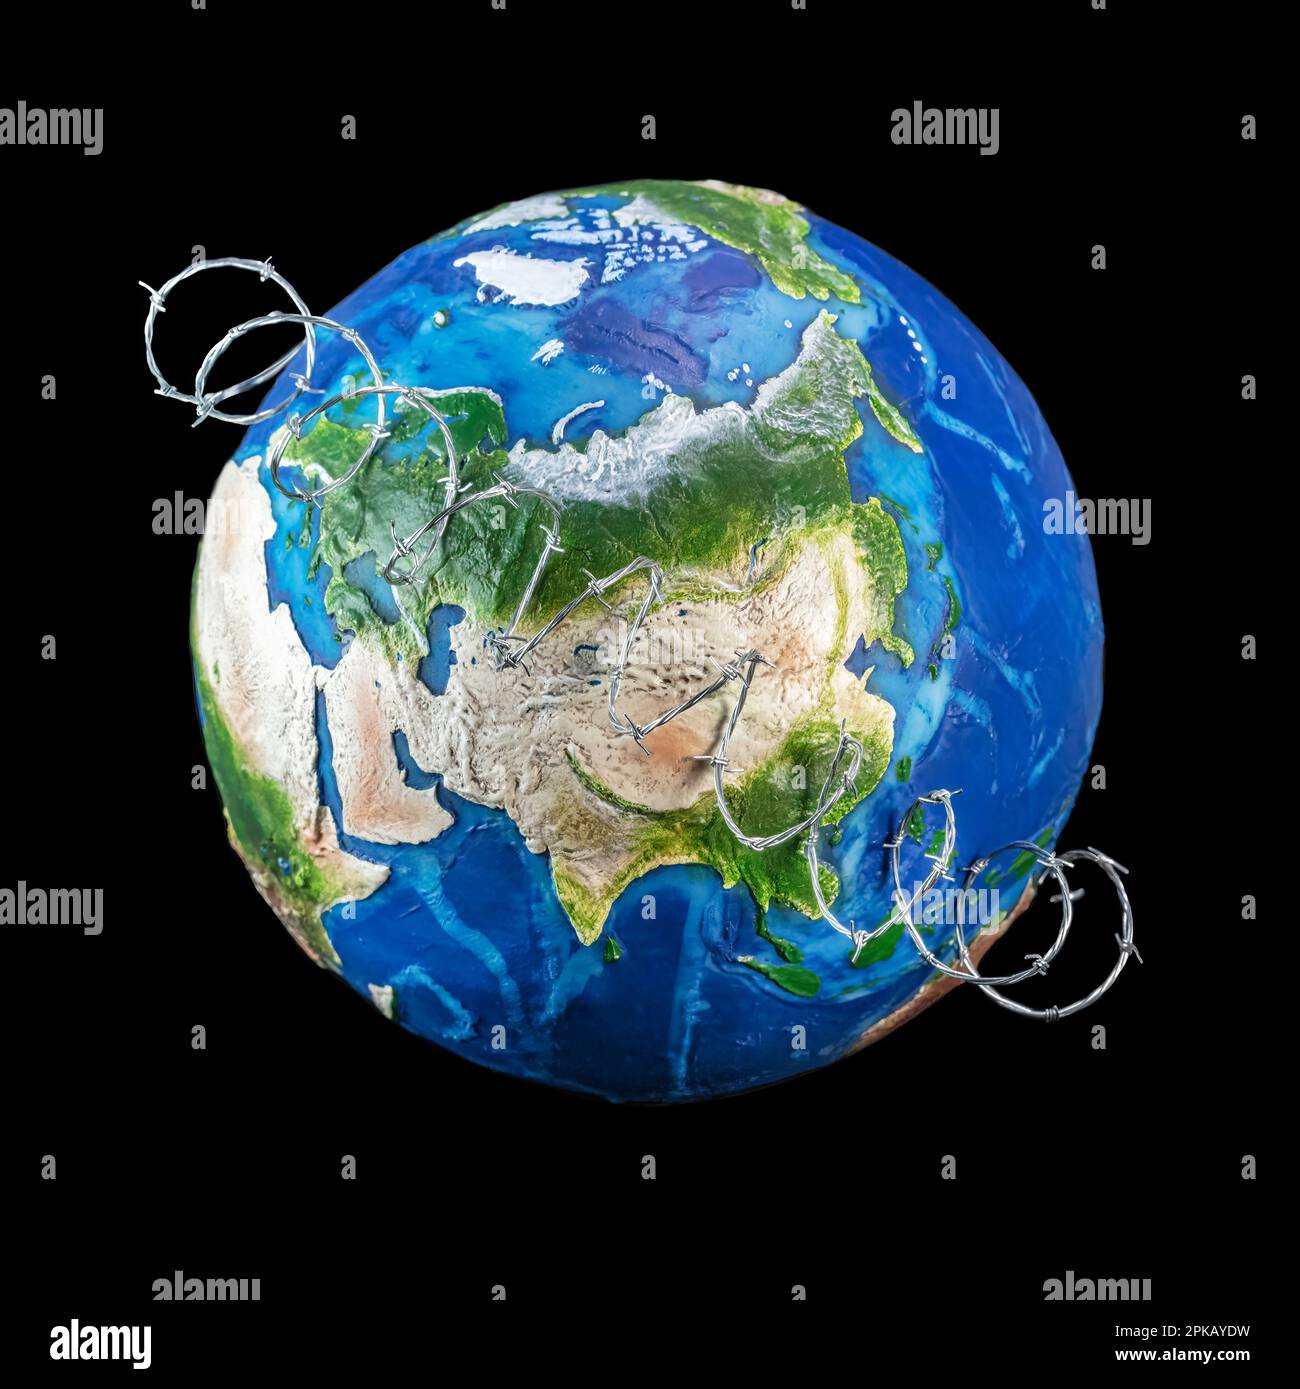 World War concept, toy globe wrapped in barbed wire across Russia and China. Stock Photo